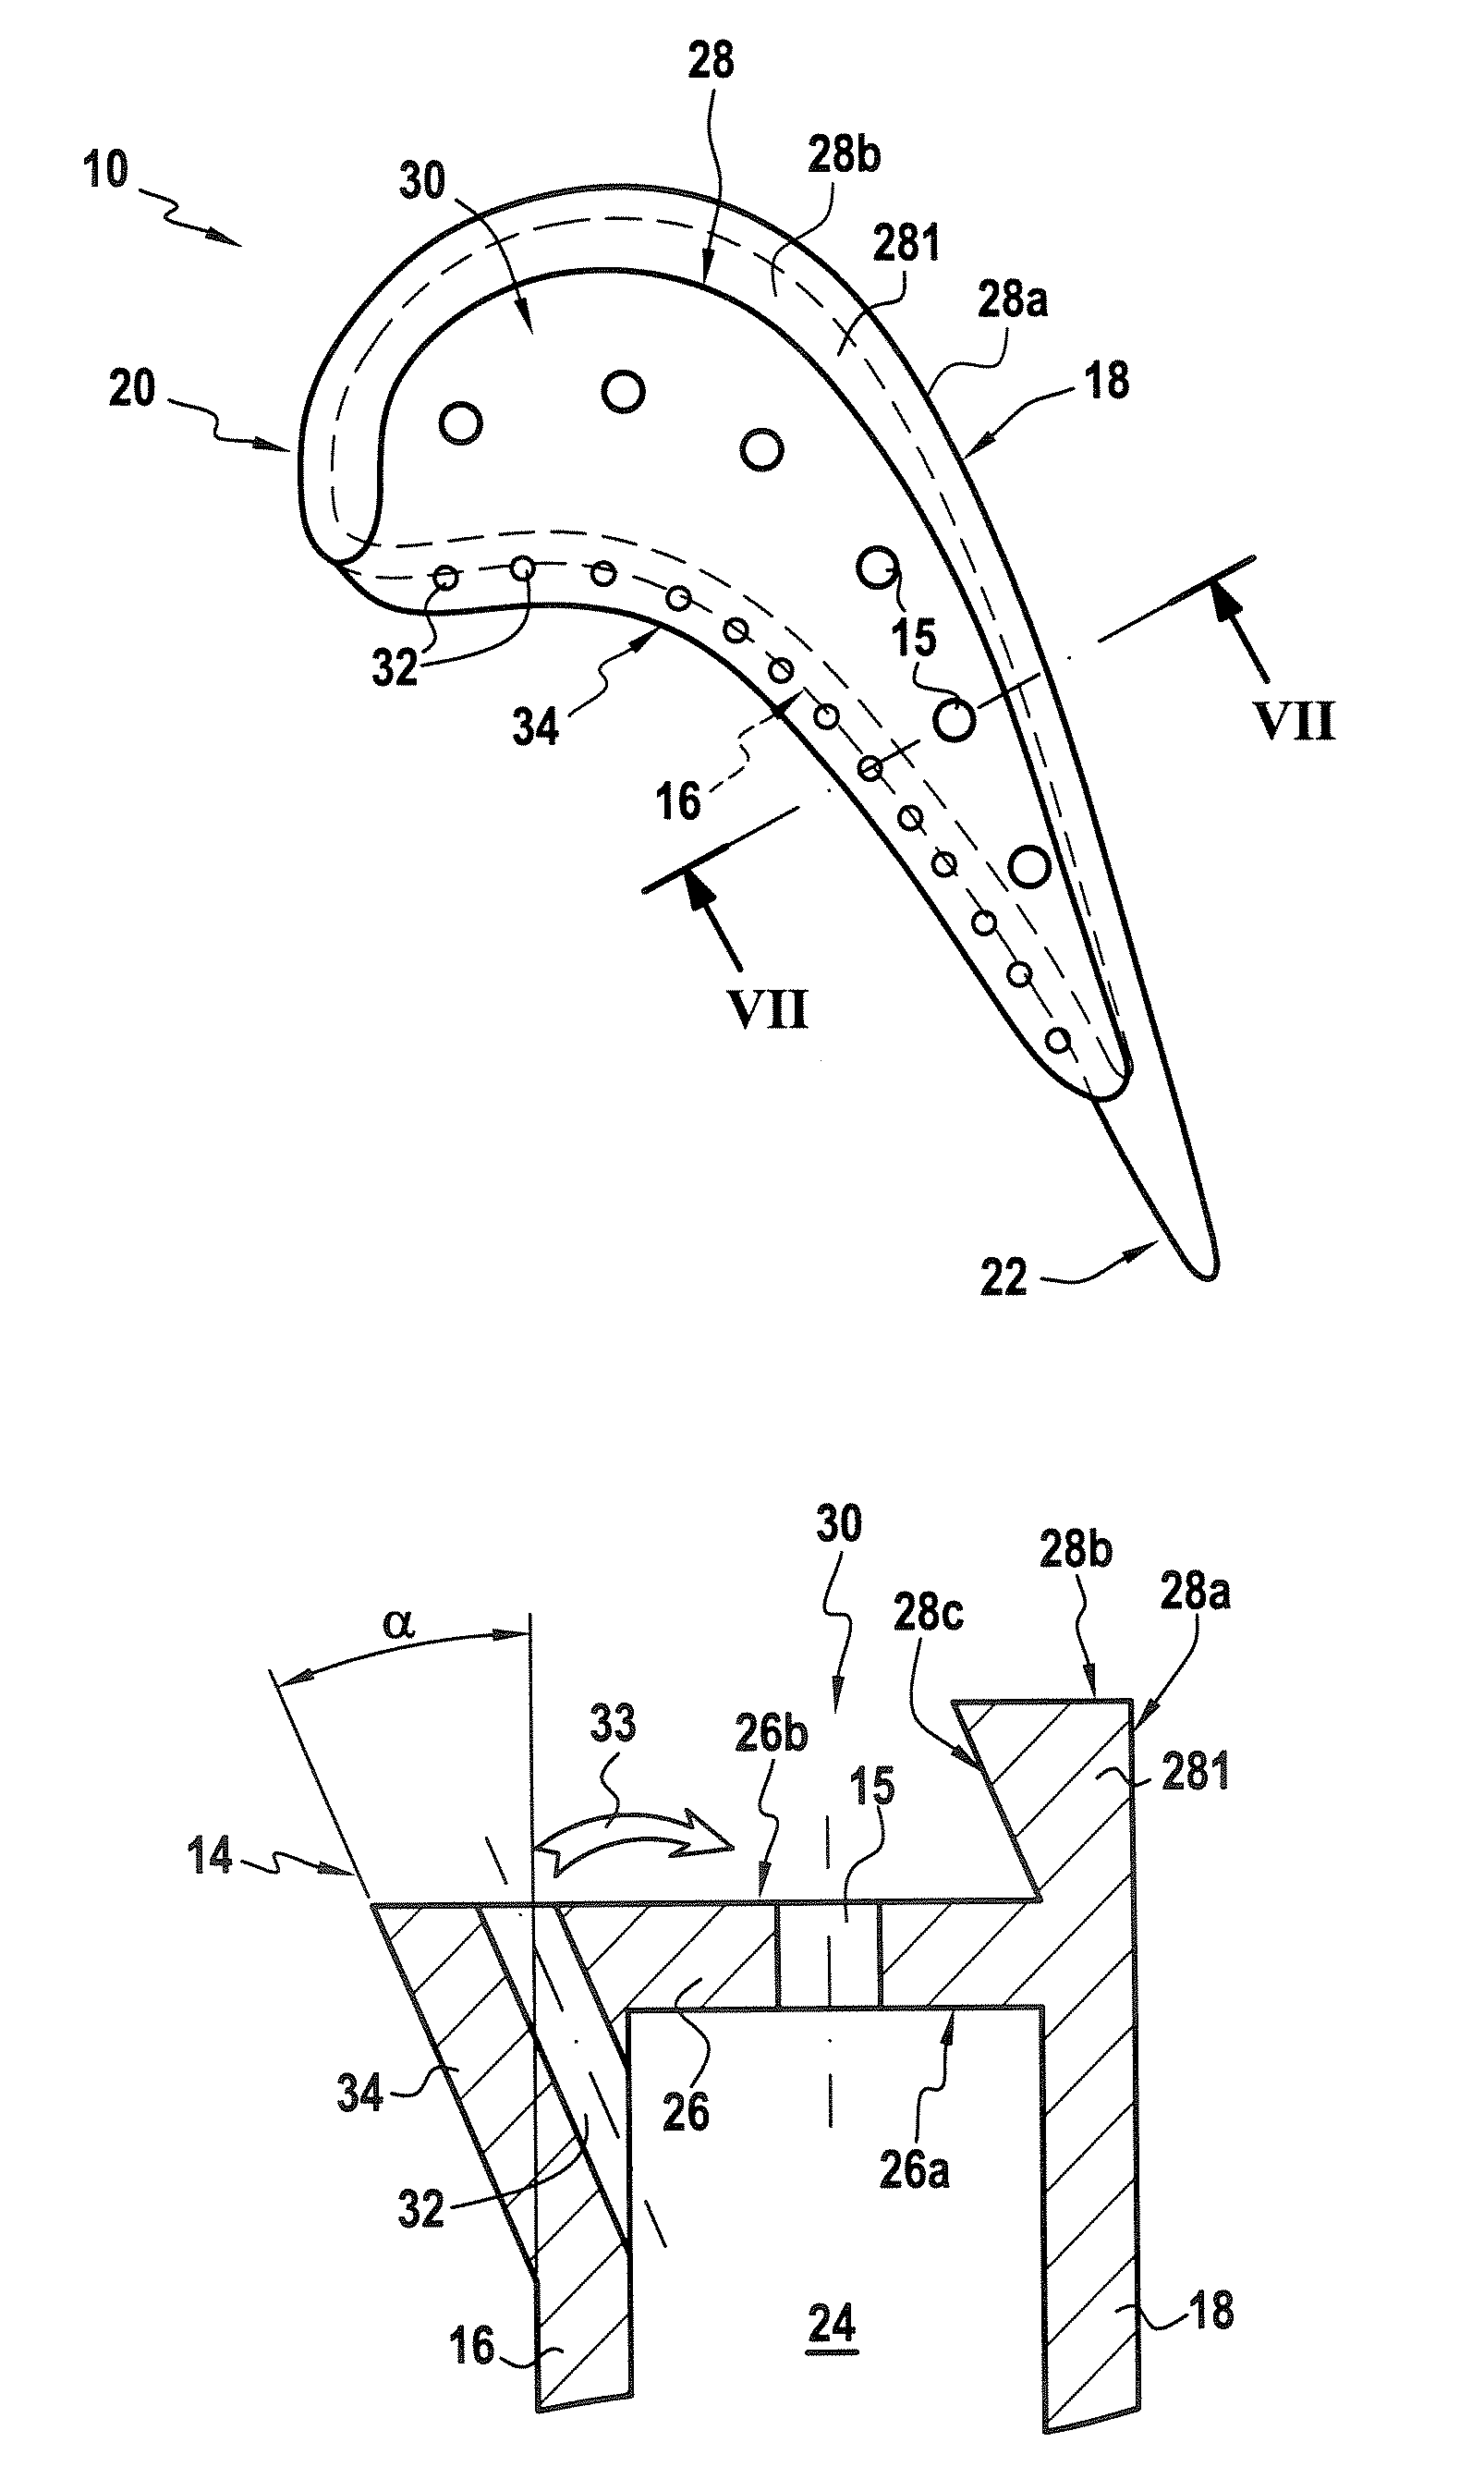 Hollow rotor blade for the turbine of a gas turbine engine, the blade being fitted with a "bathtub"